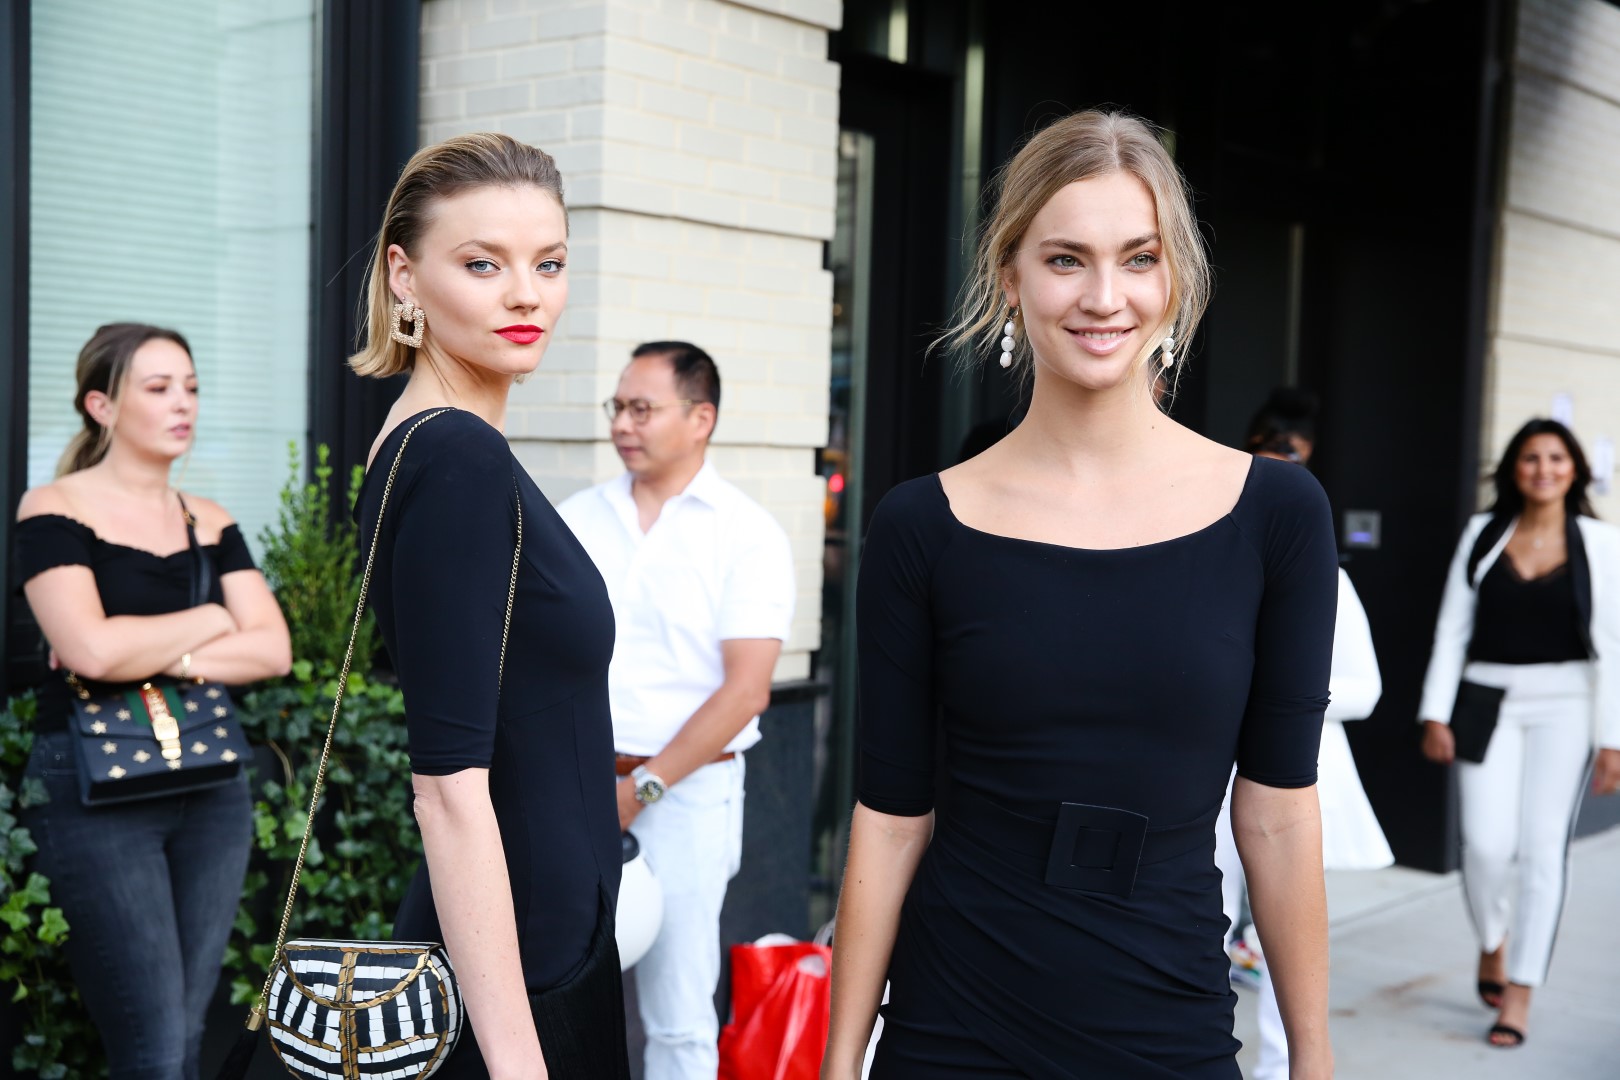 NEW YORK, NEW YORK - SEPTEMBER 07: Two guests wearing black dresses during New York Fashion Week at Spring Studios on September 07, 2019 in New York City. (Photo by Donell Woodson/Getty Images)